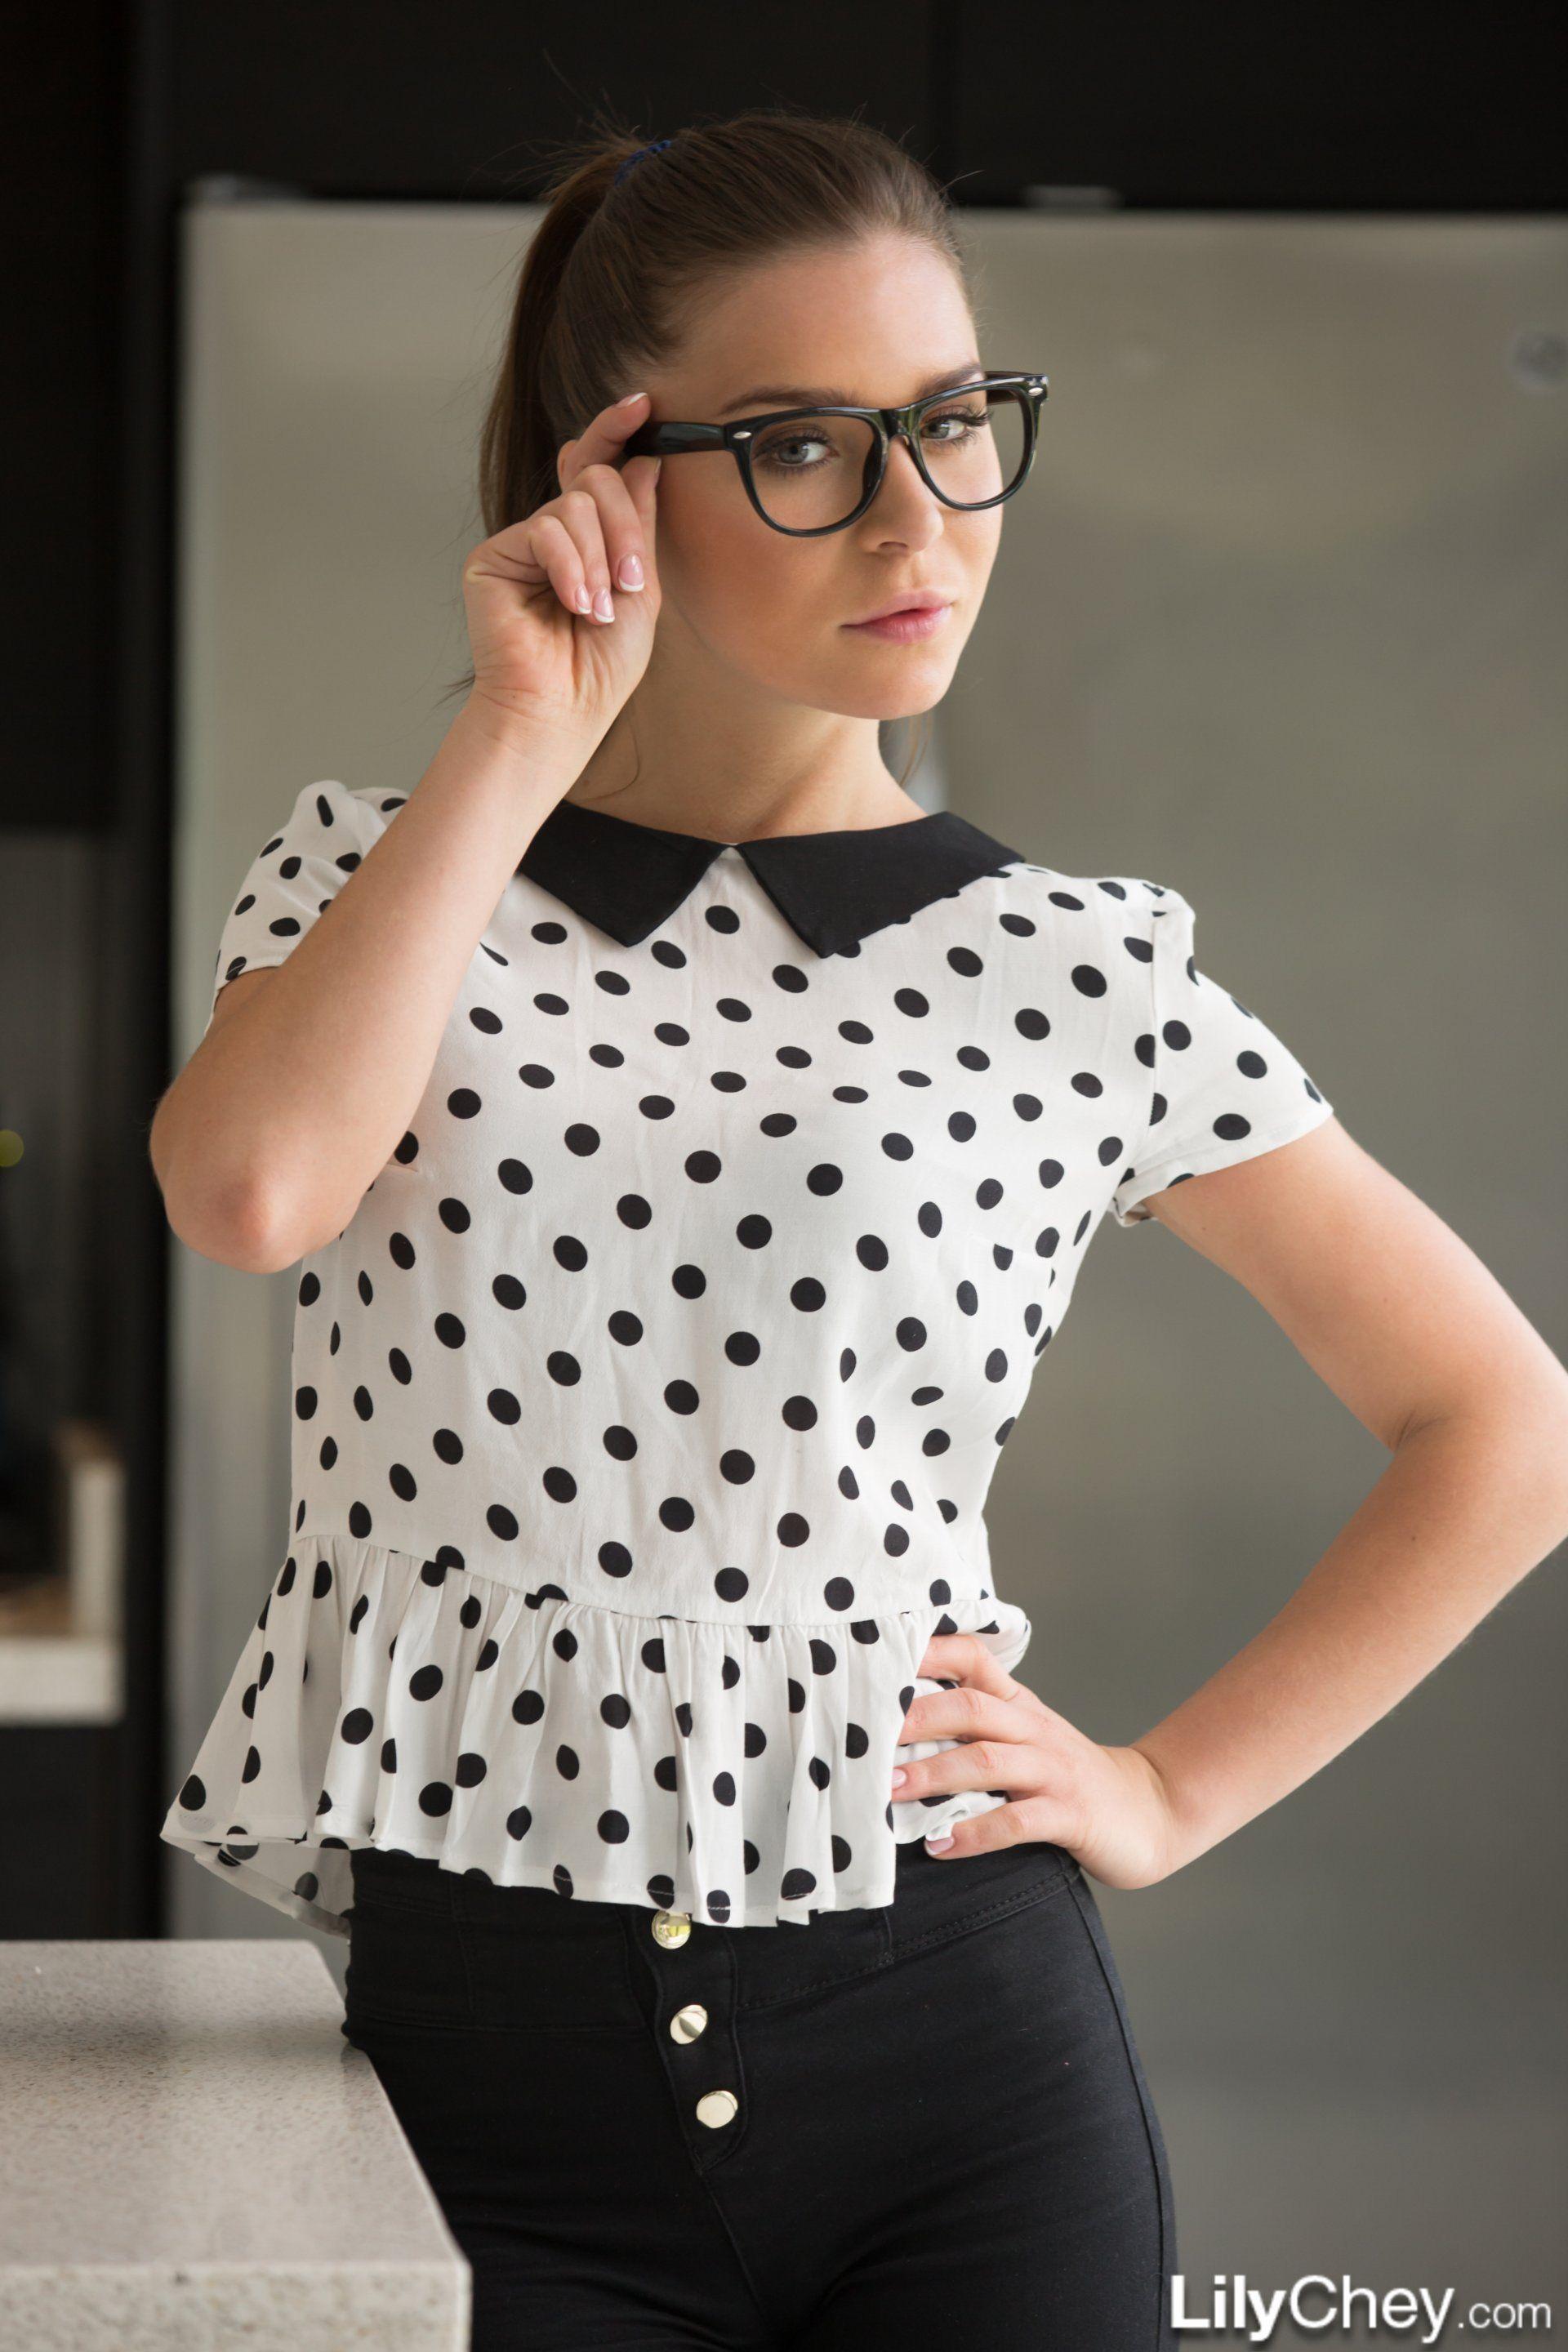 Brunette coed Lily Chey strips in her polkadots and glasses #58959468